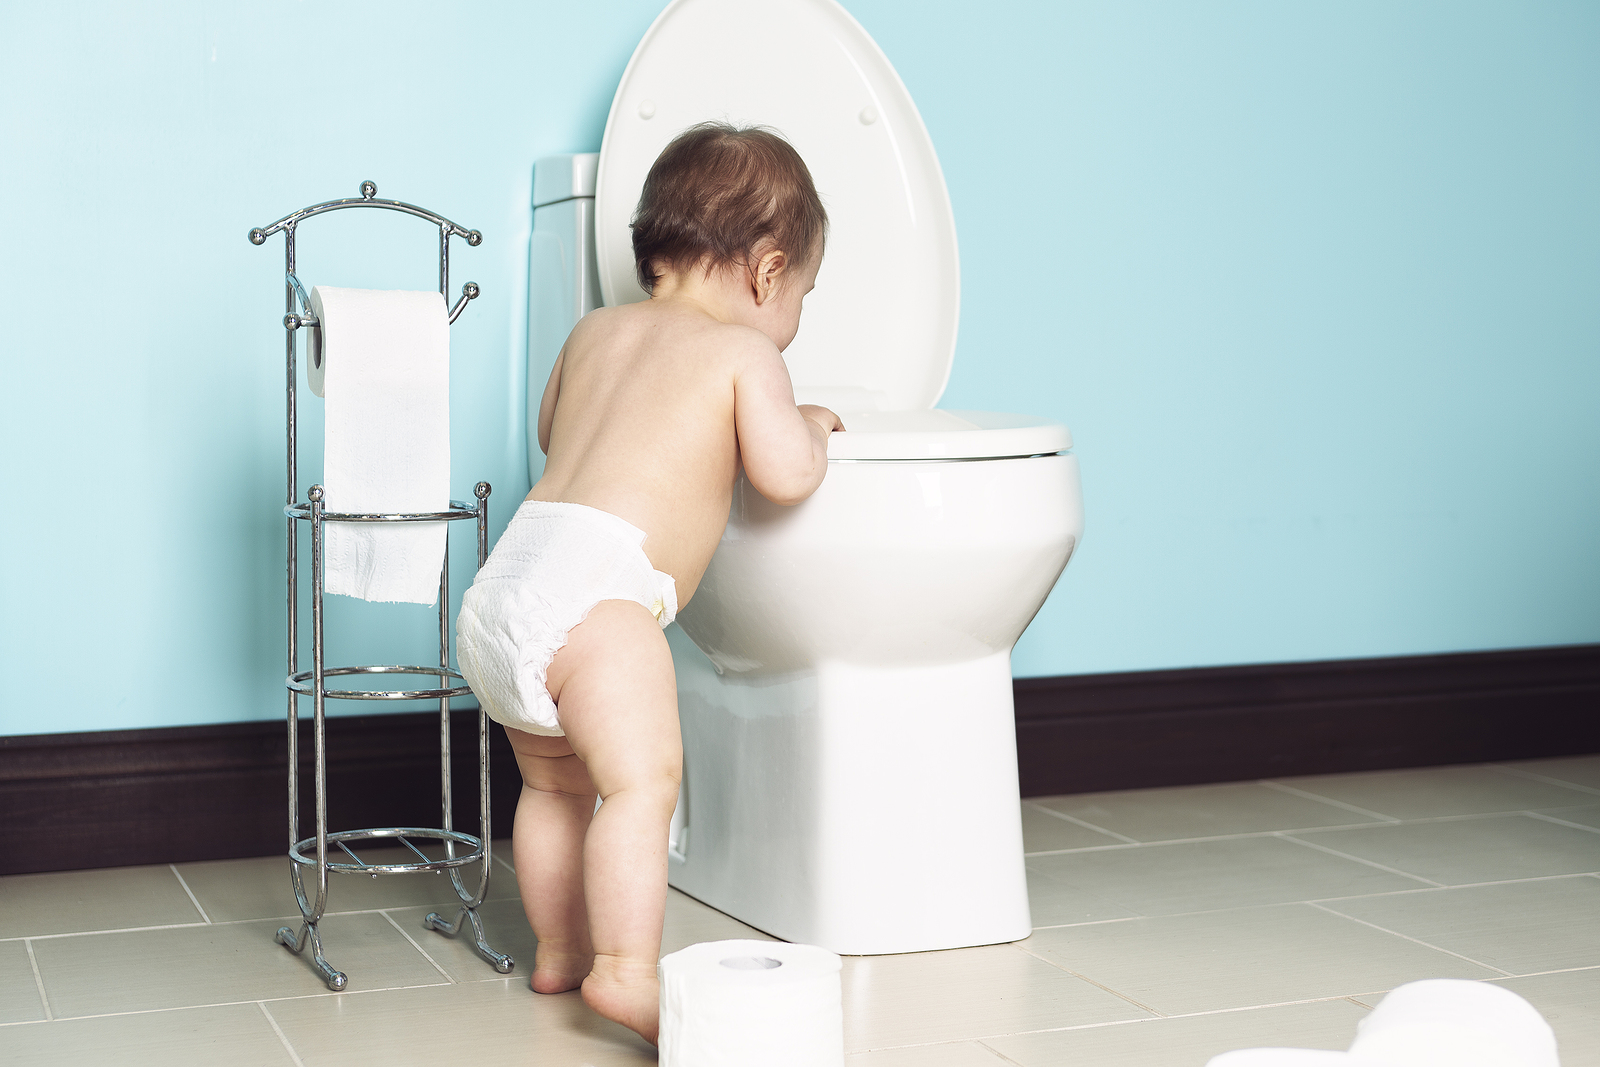 Avoid costly plumbing bills by being kind to your toilet